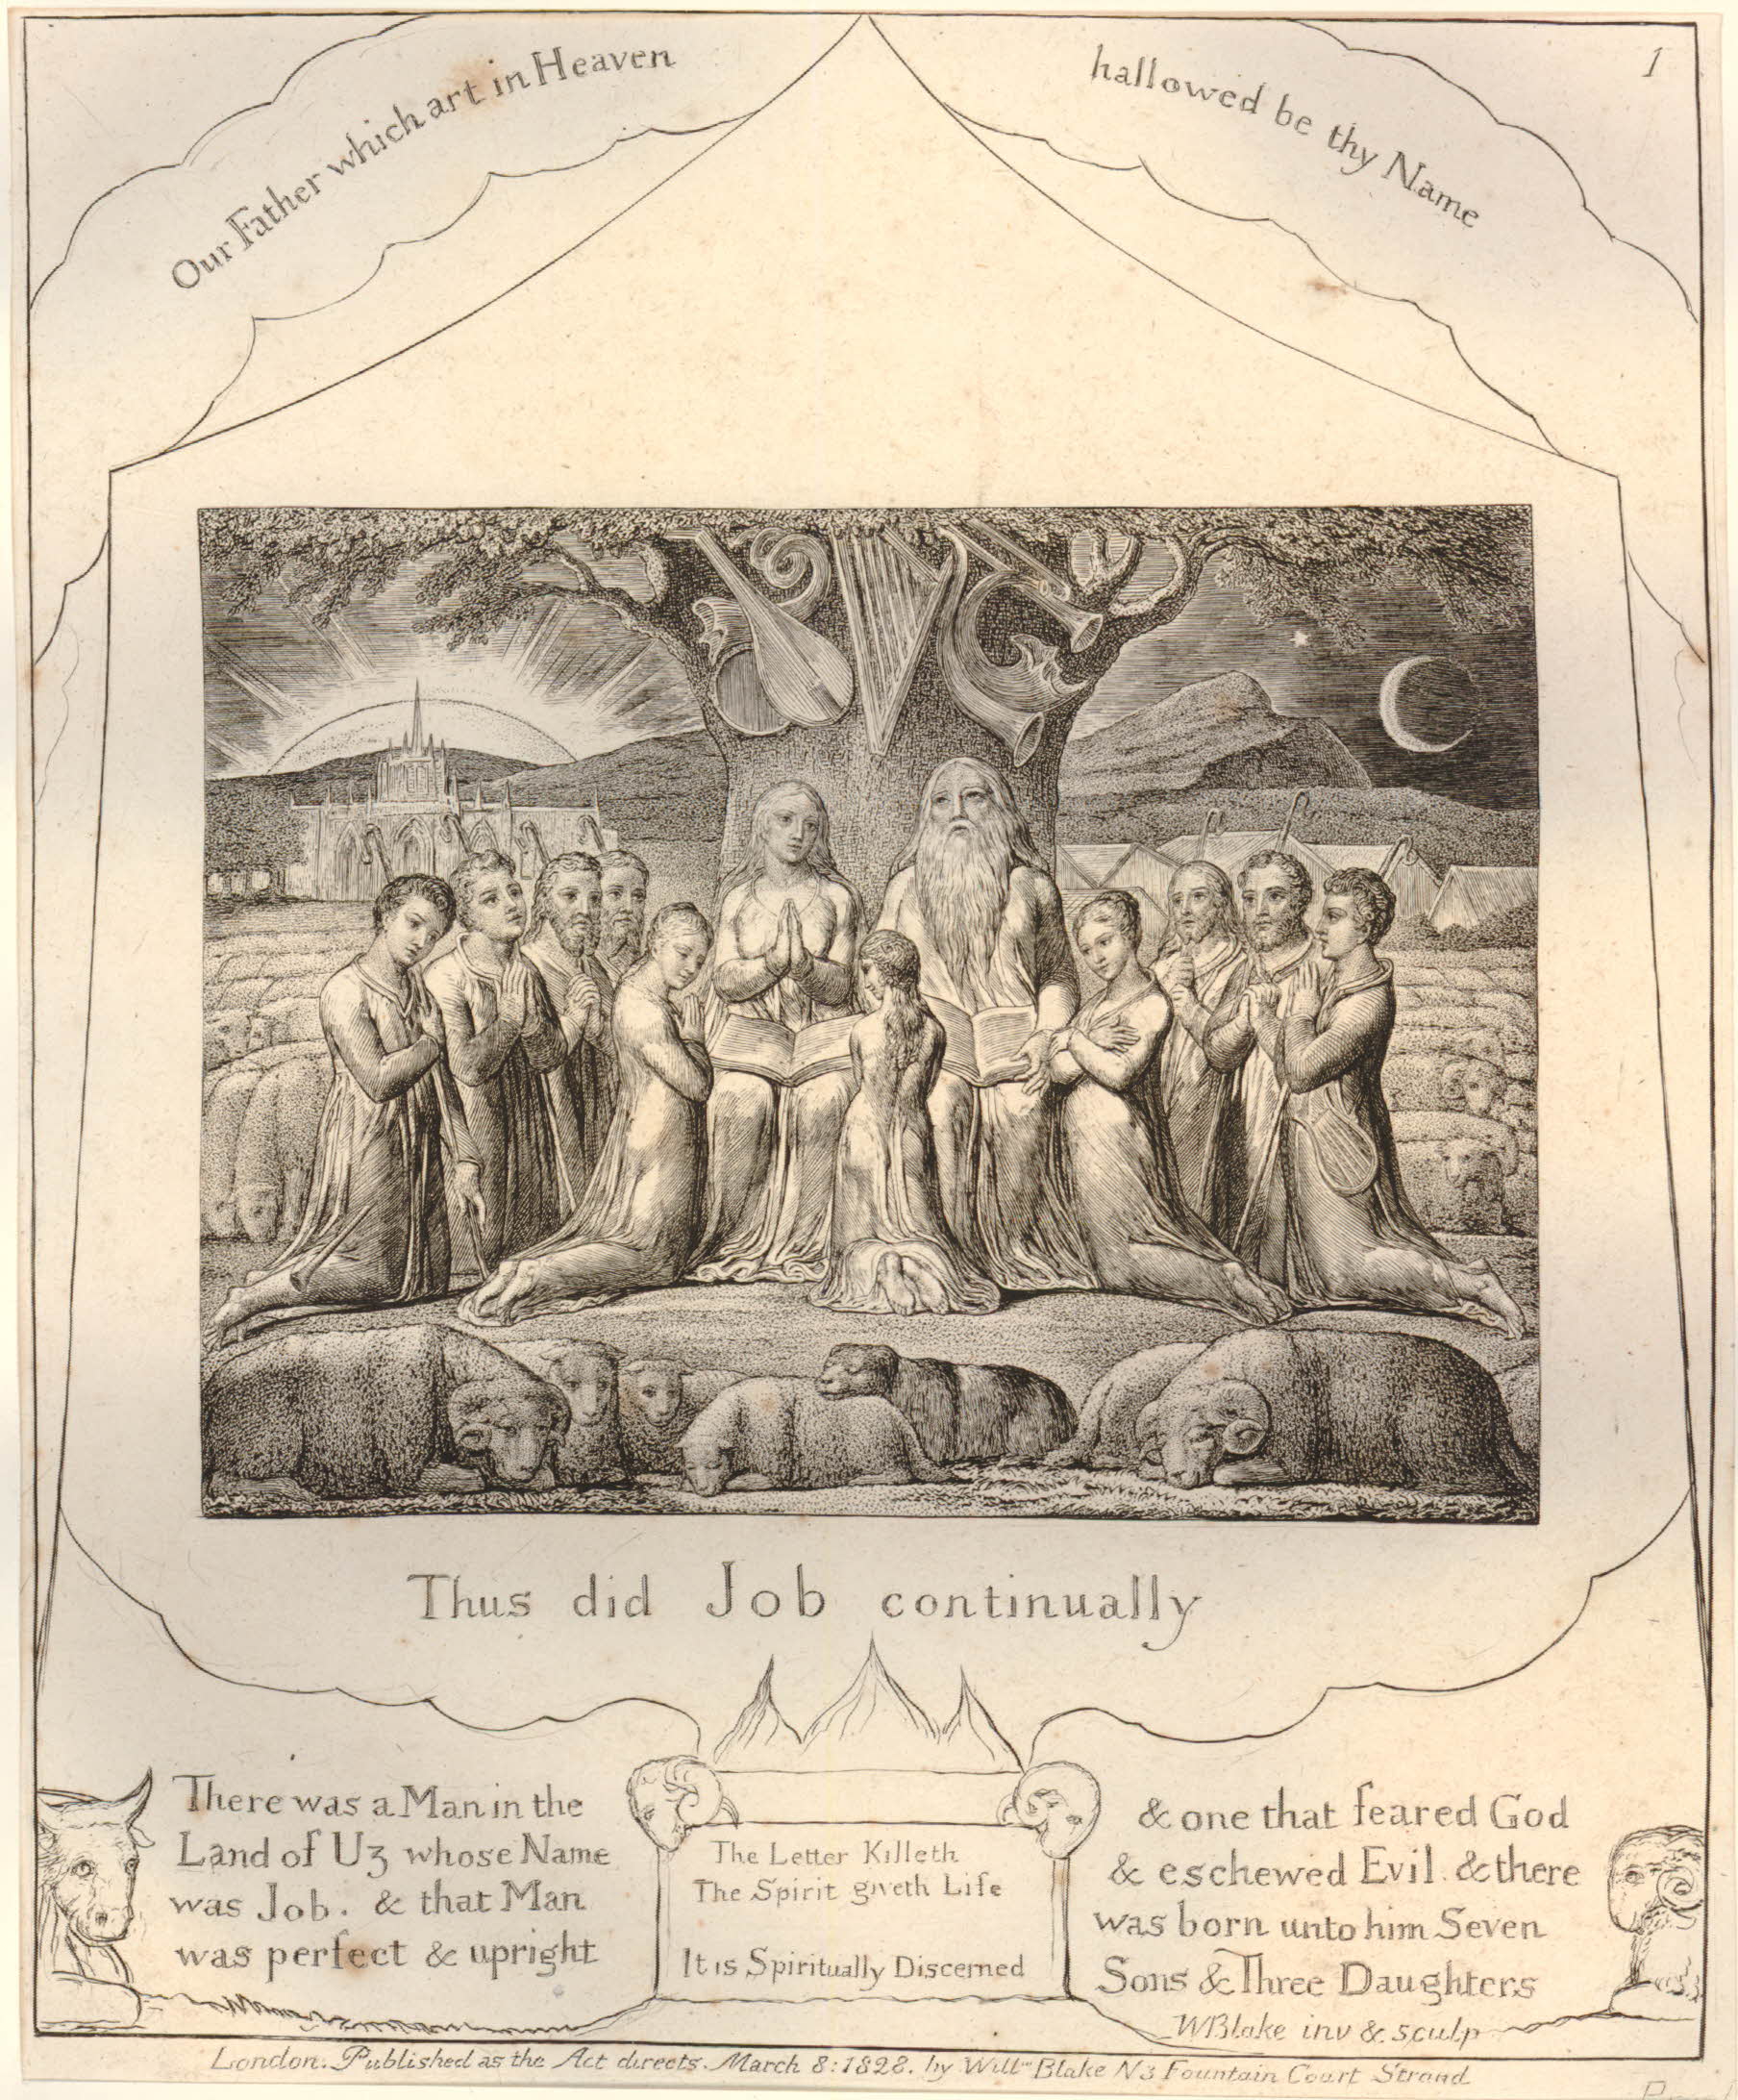 Old black and white sketch in a book with a group of people praying underneath a tree